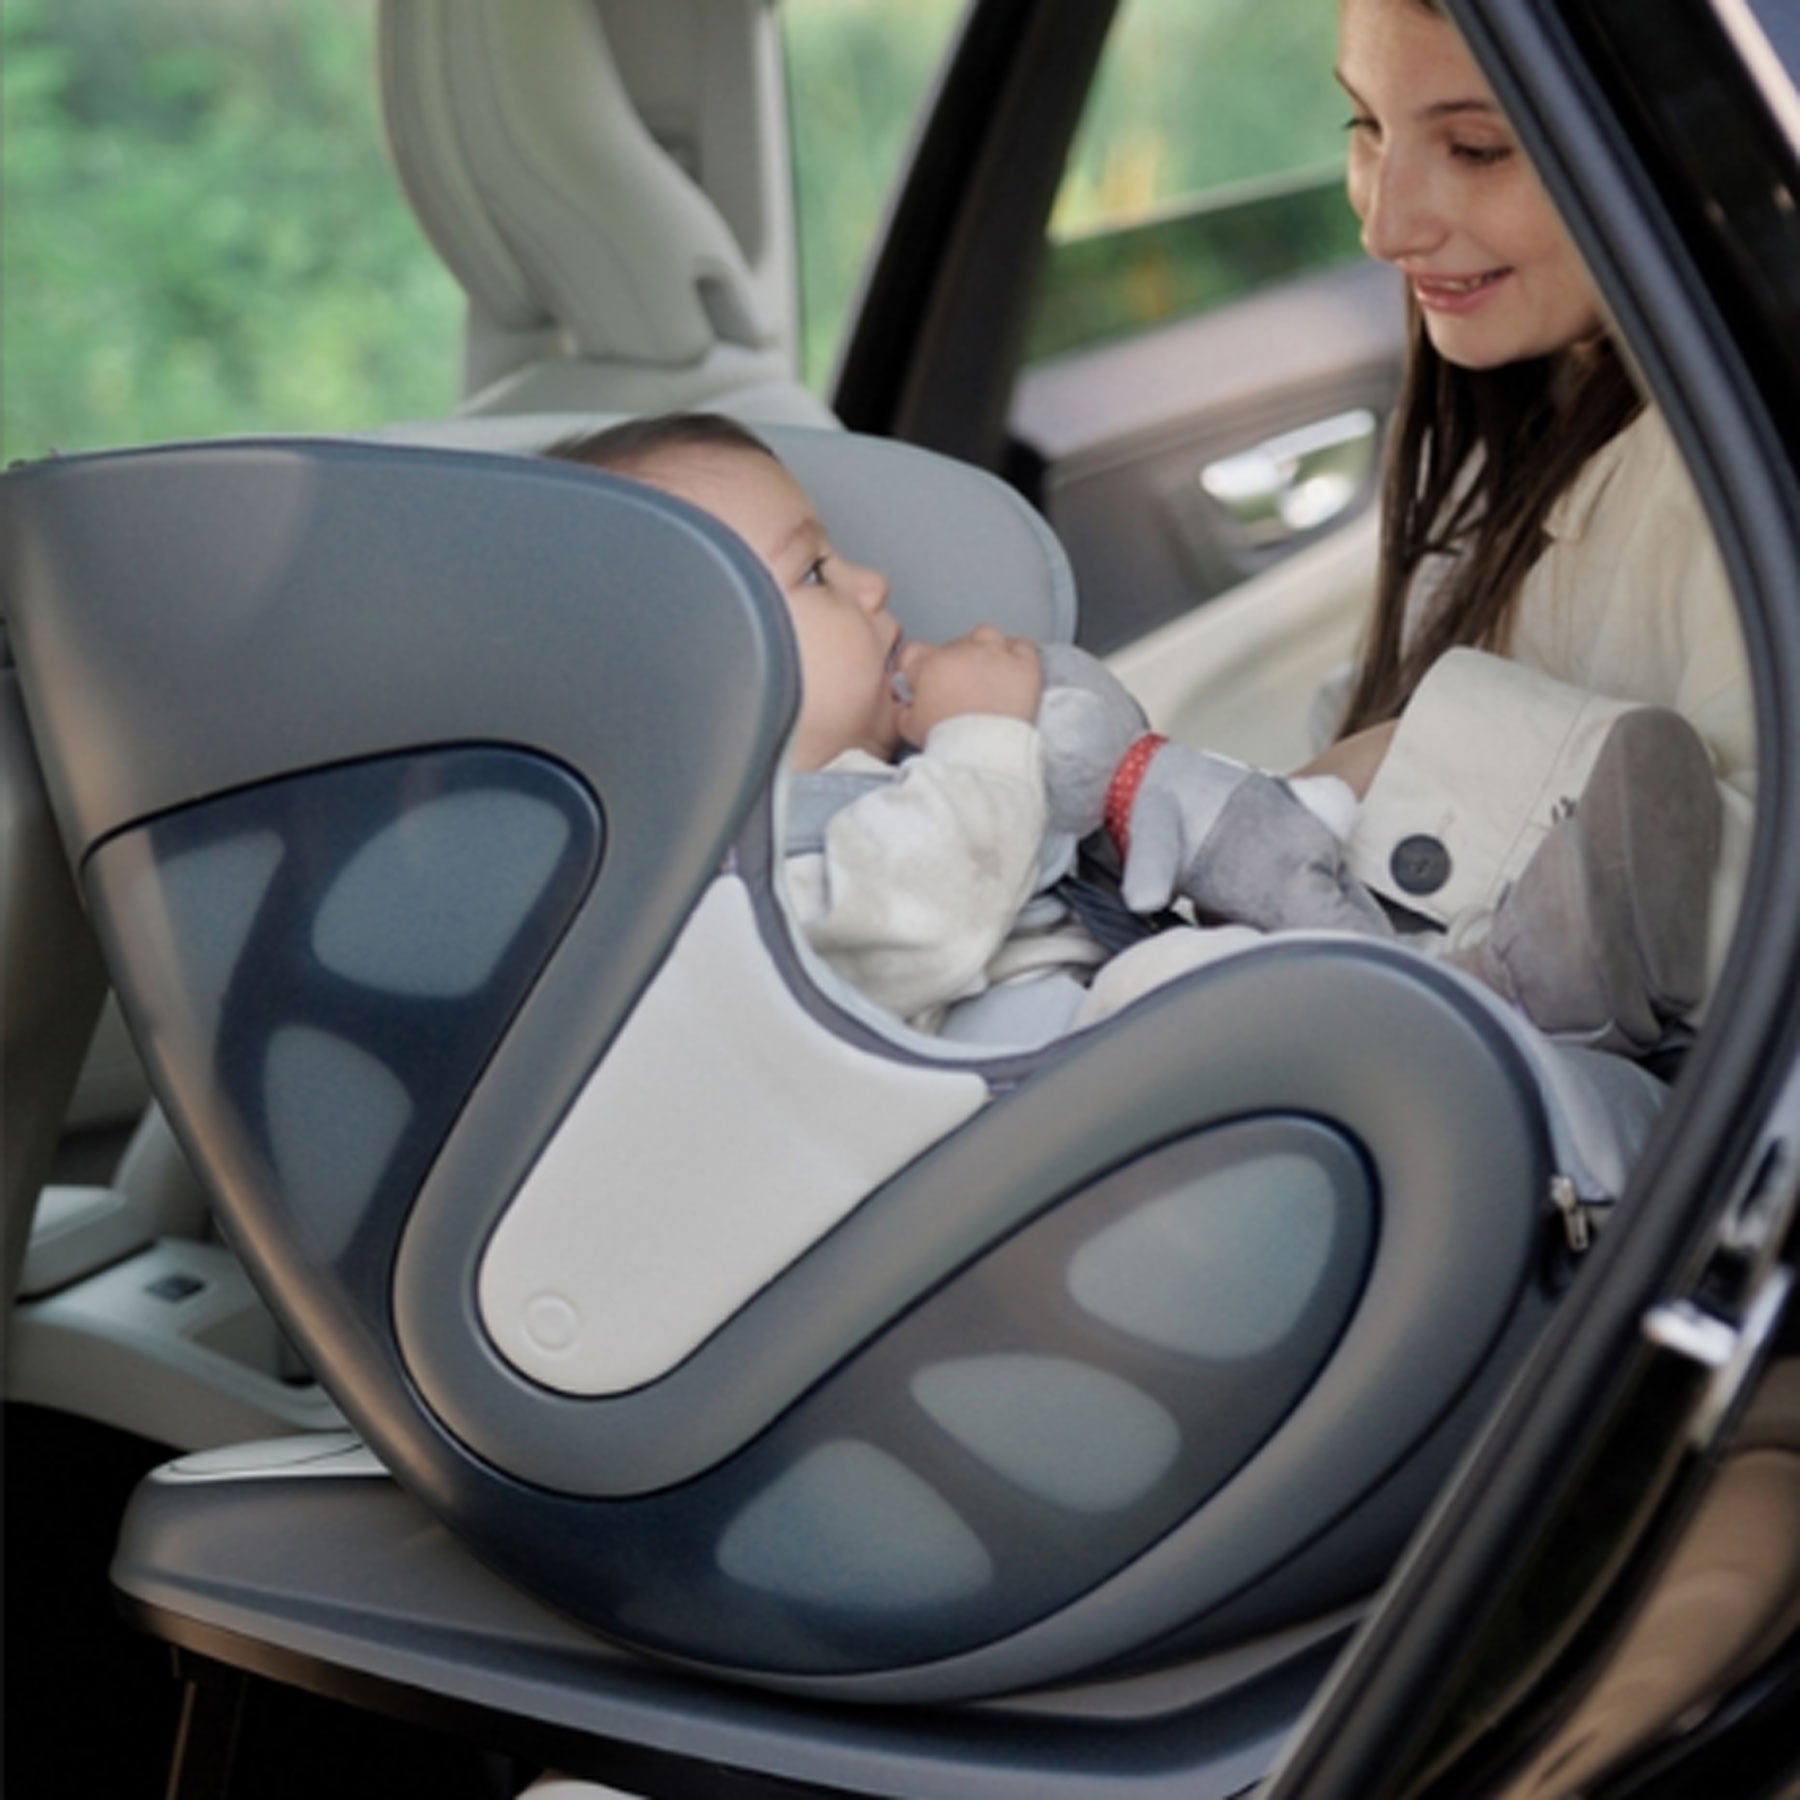 Mom sitting next to baby in babyark Convertible Car Seat + Base - Glacier Ice Seat / Charcoal Grey Base